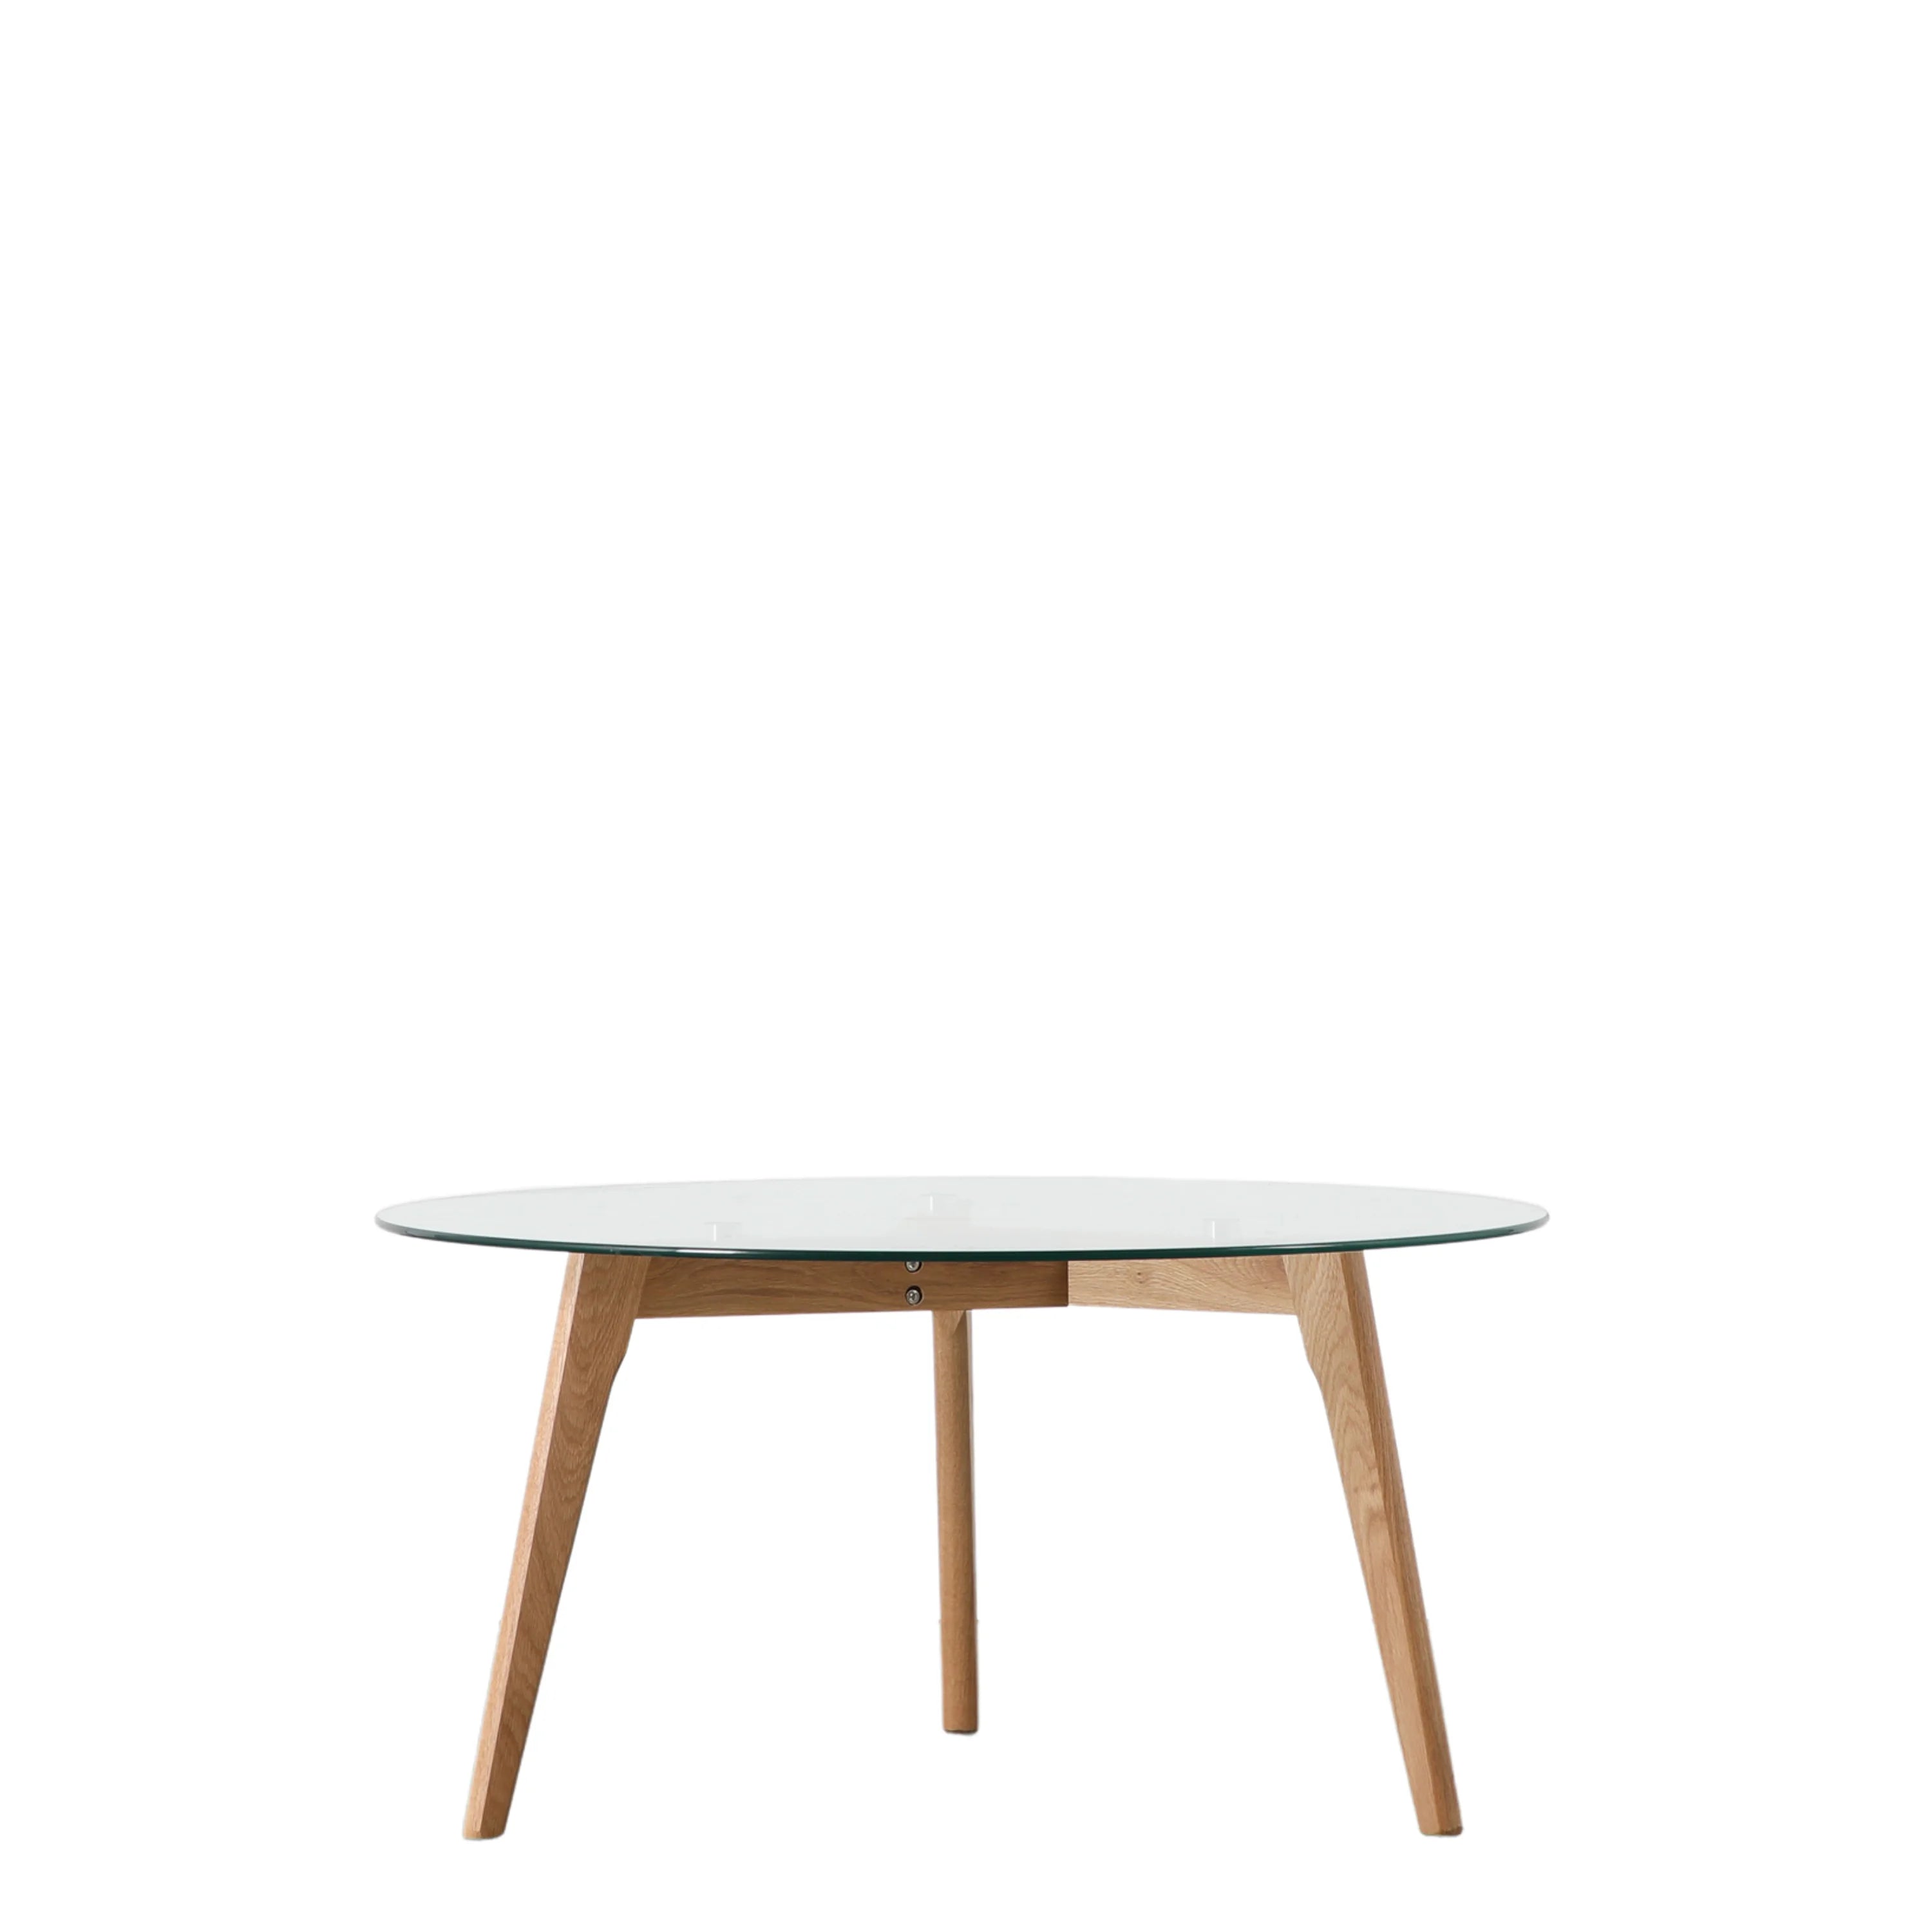 Jack round glass coffee table in natural oak with clear glass | MalletandPlane.com